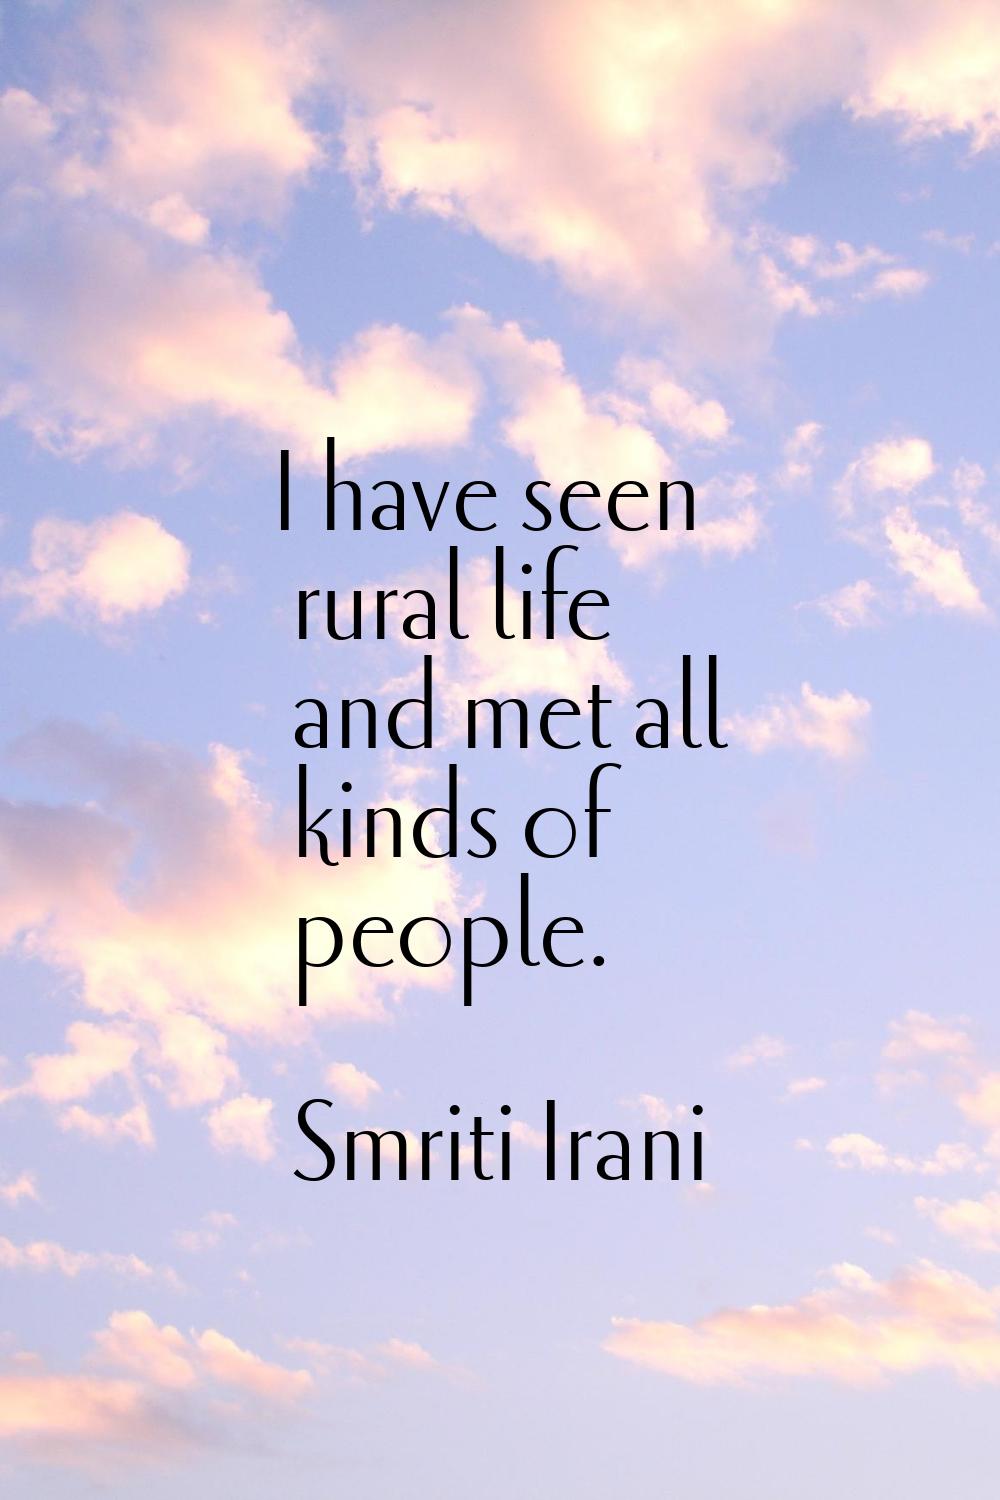 I have seen rural life and met all kinds of people.